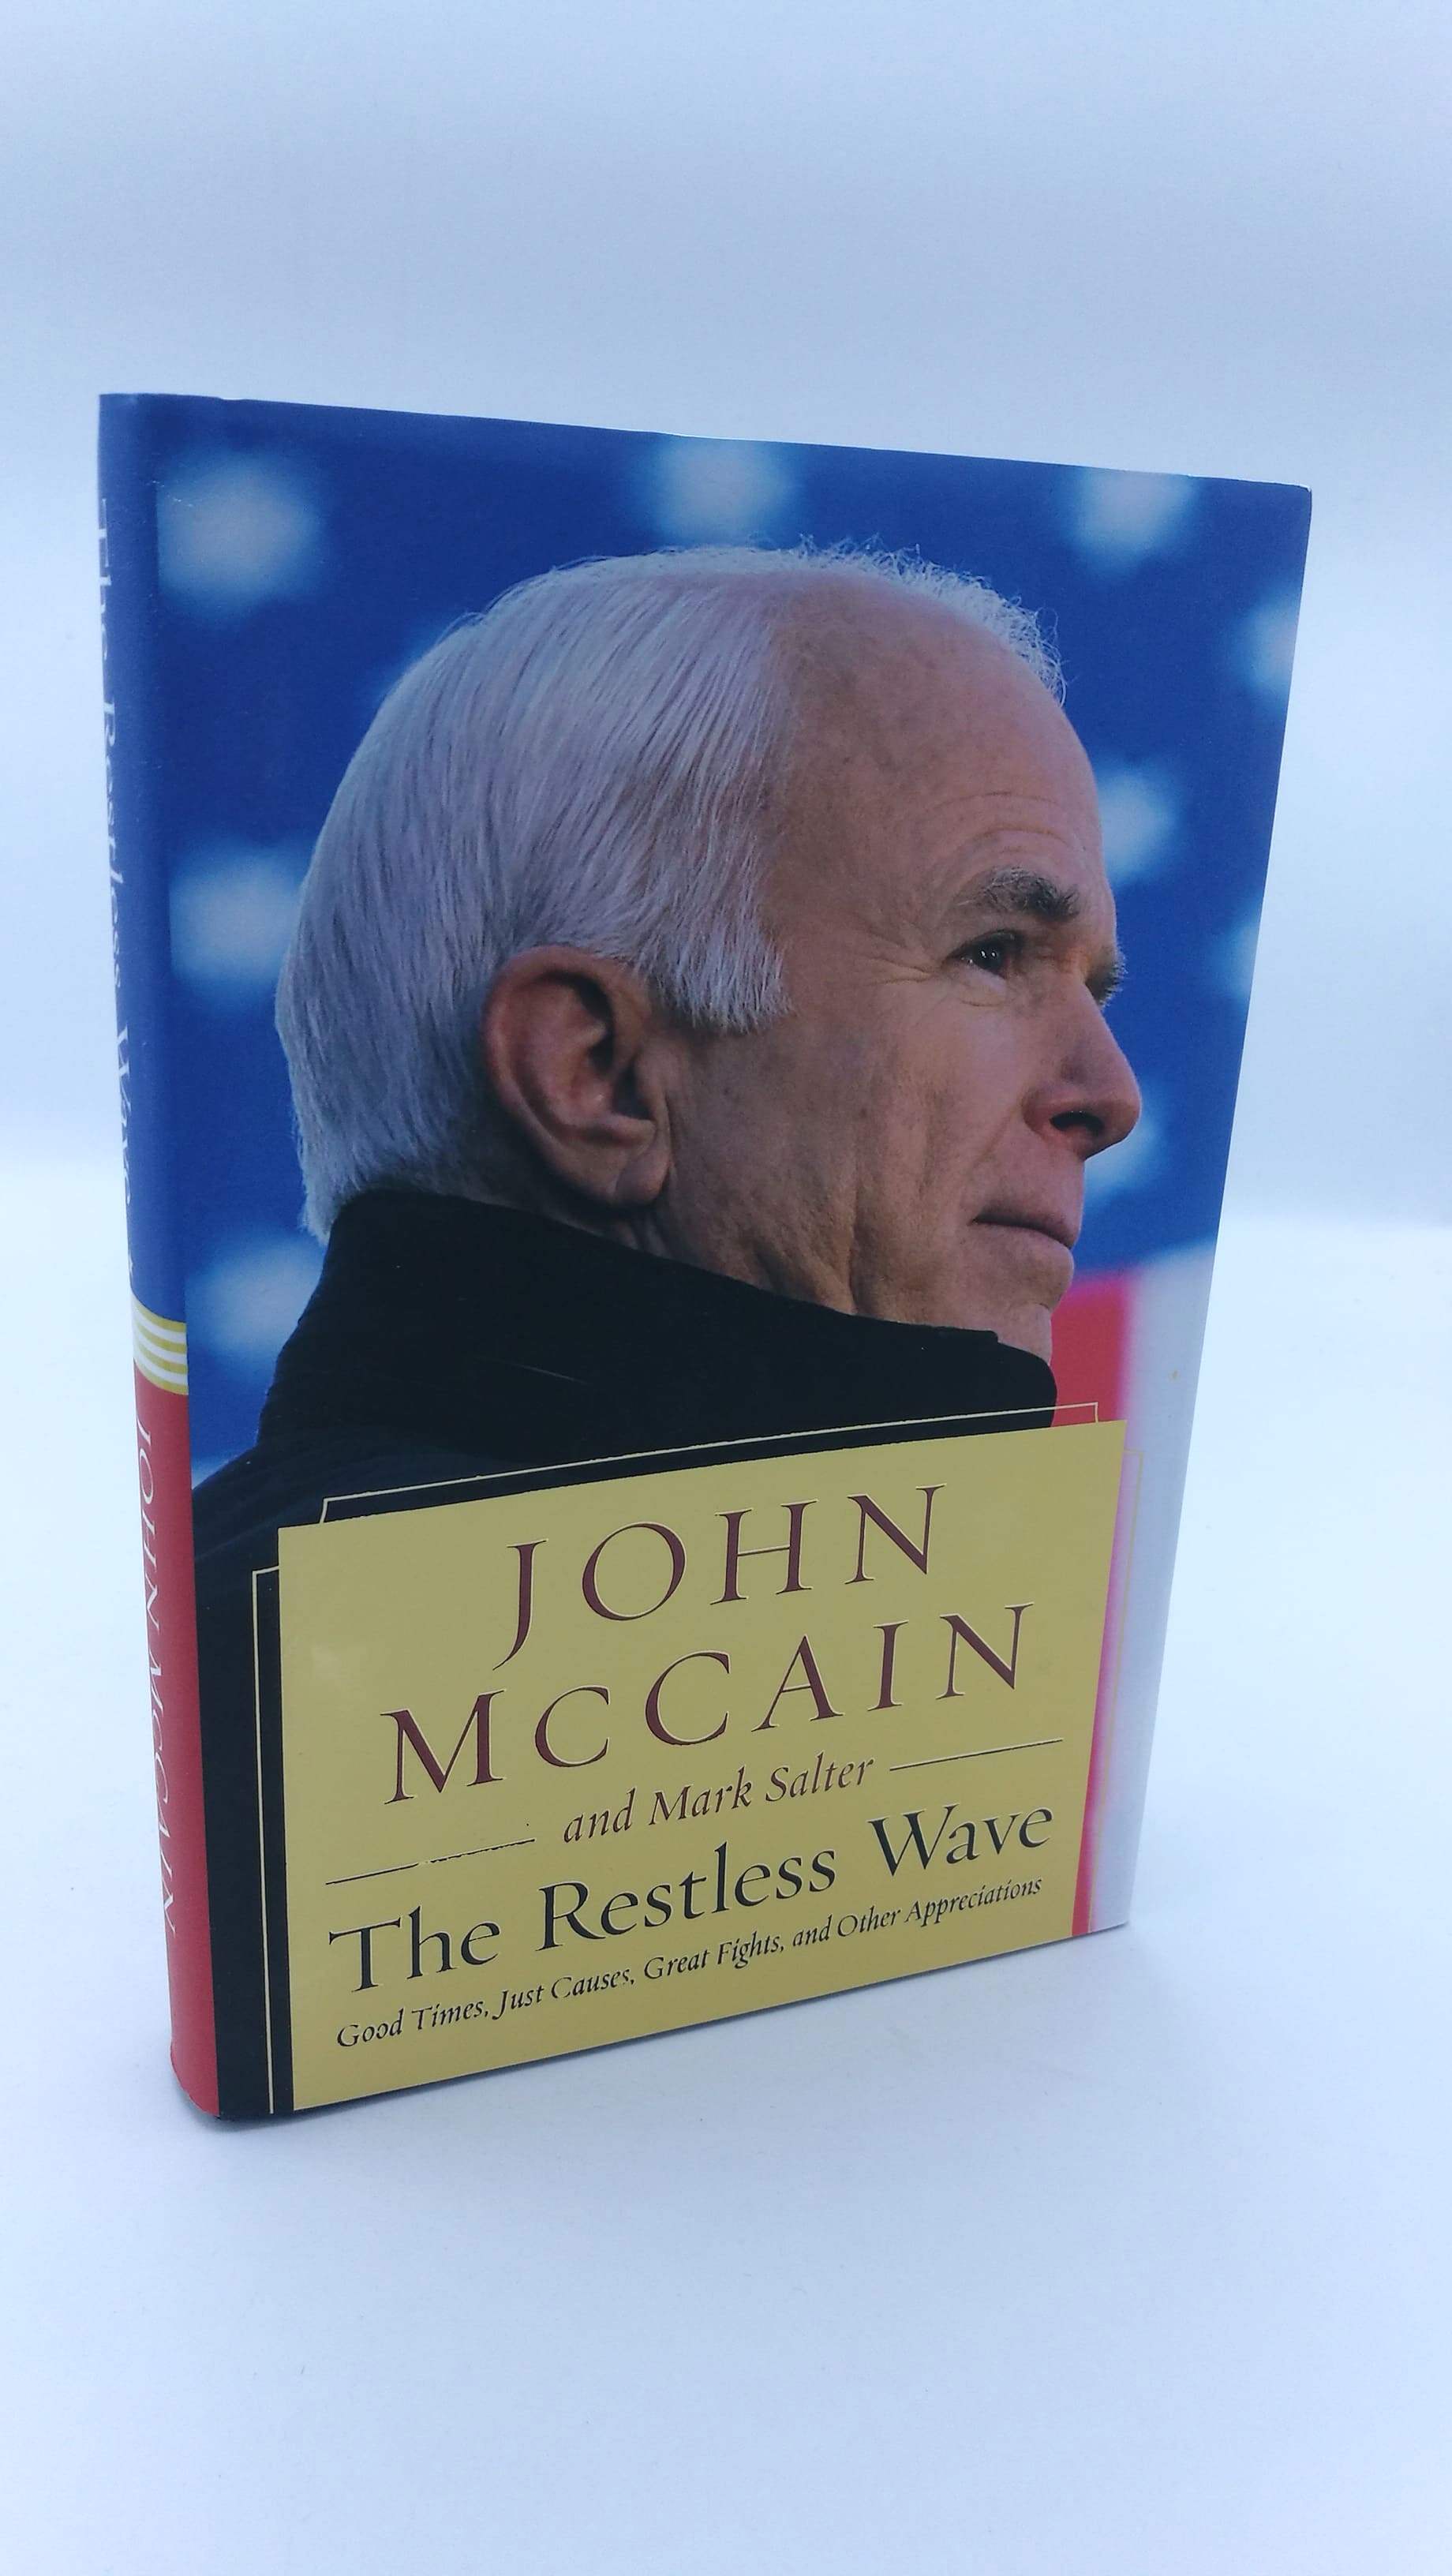 The Restless Wave: Good Times, Just Causes, Great Fights, and Other Appreciations - John McCain